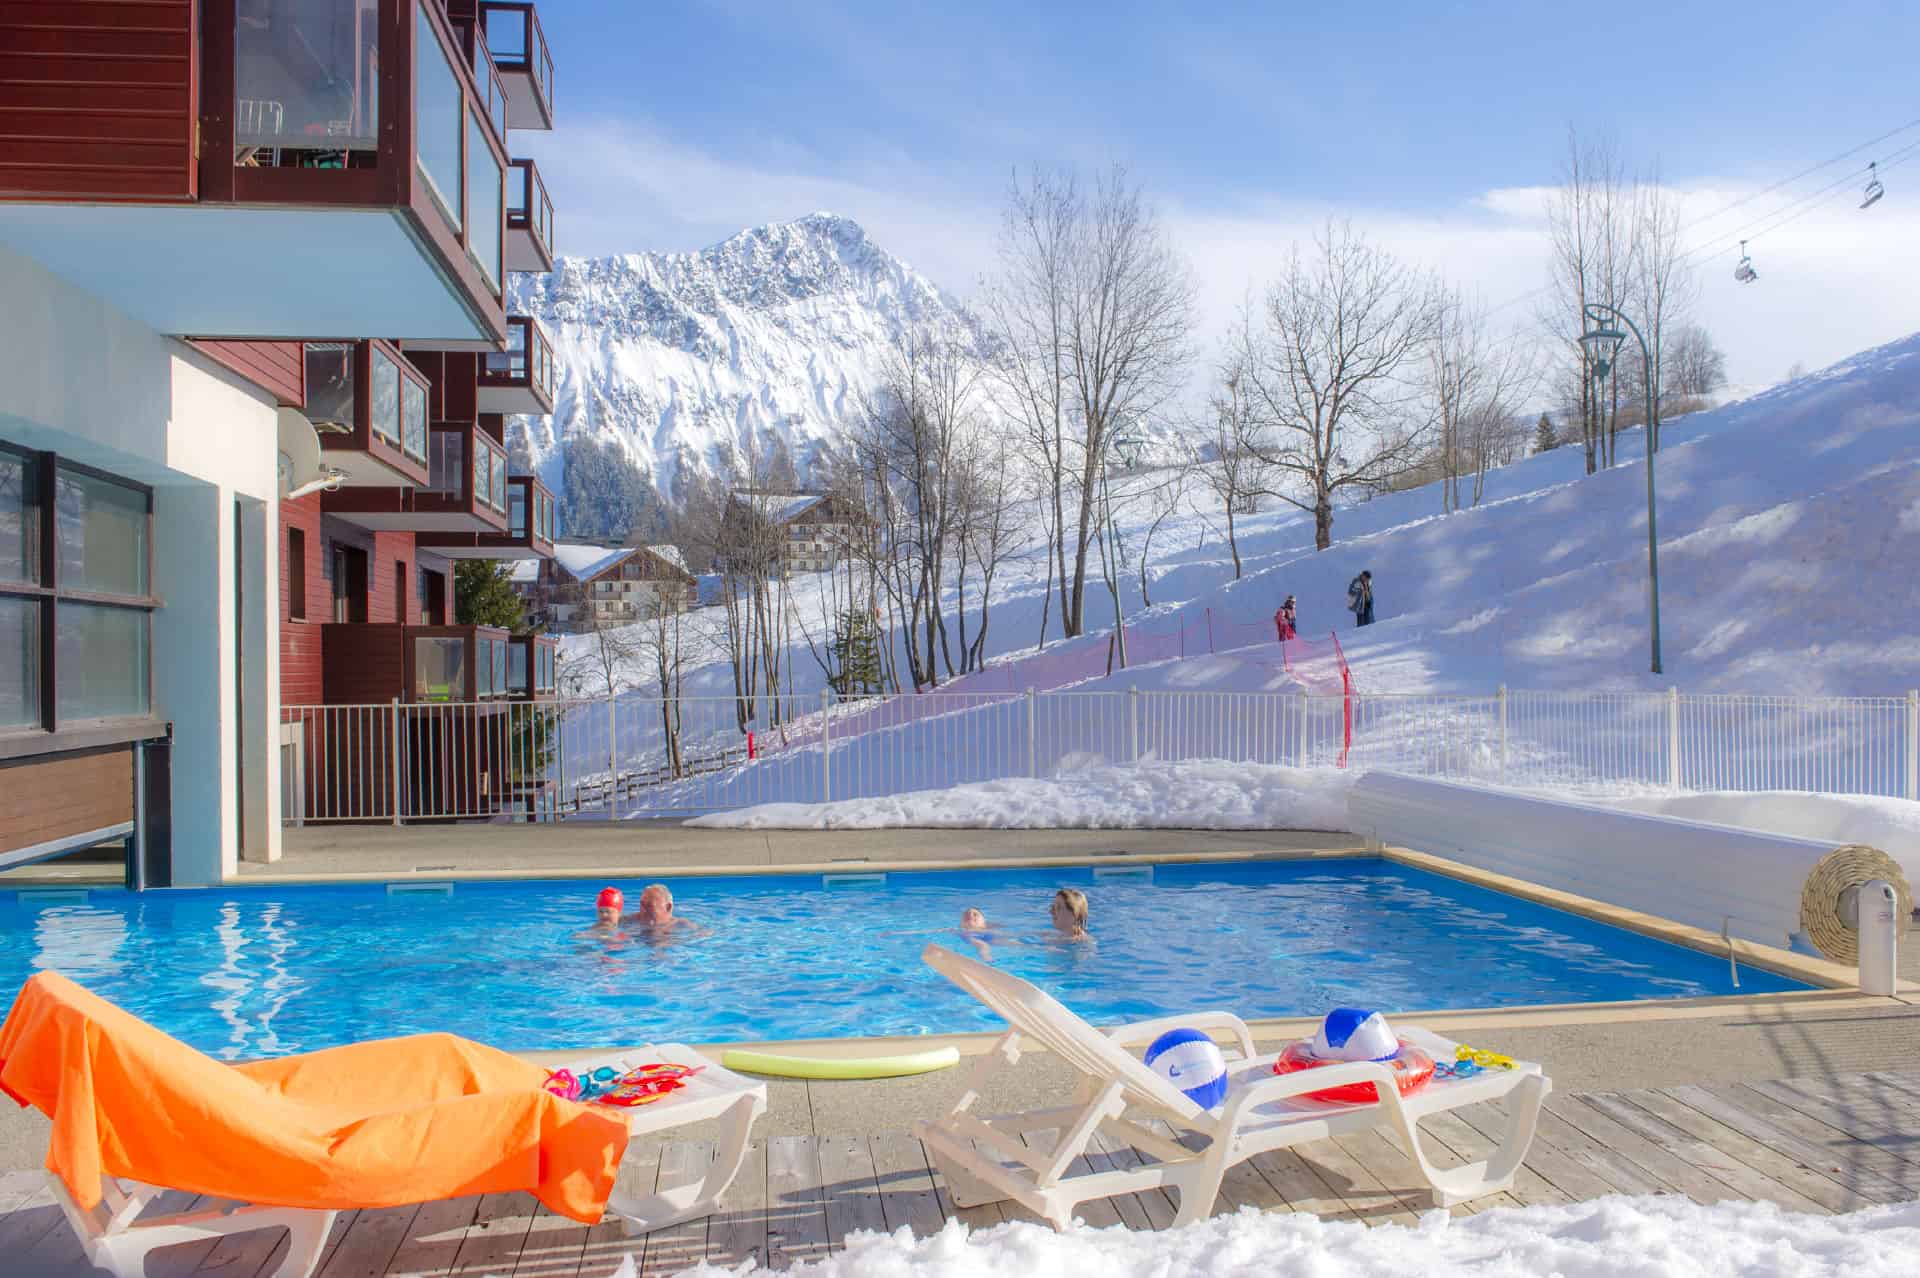 Indoor and outdoor heated swimming pool of the holiday residence Goélia Les Terrasses du Corbier au Corbier in winter